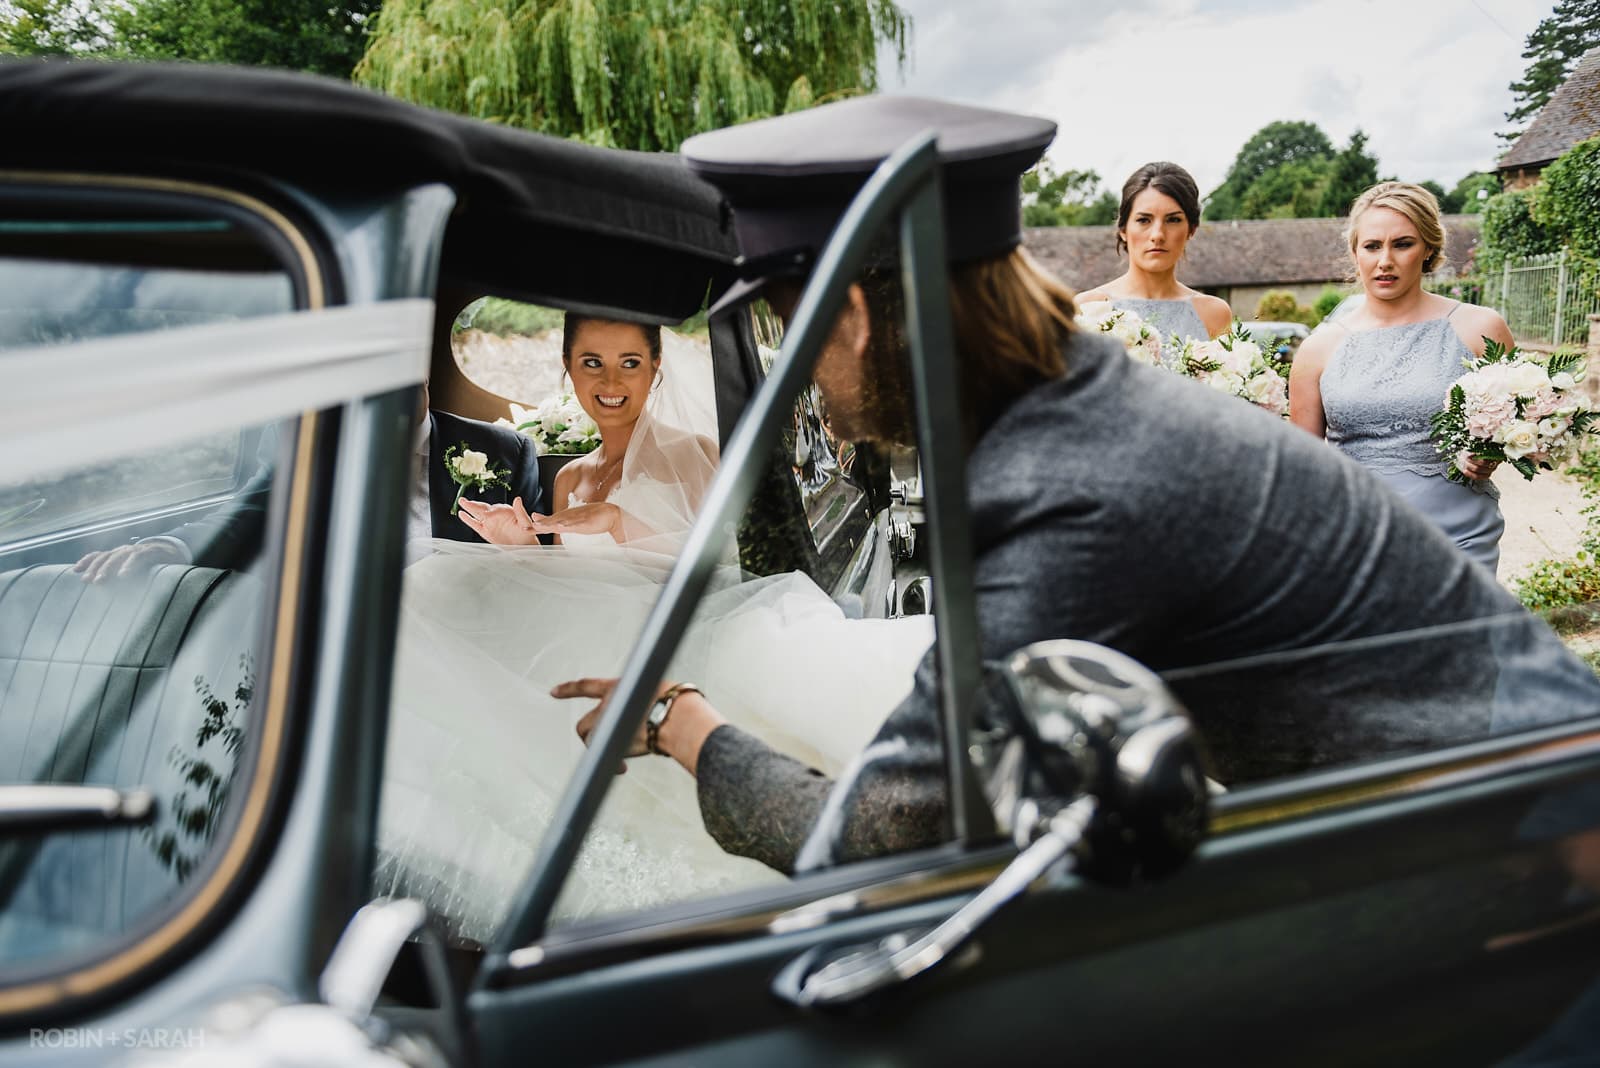 Wedding car drive helps bride out of car as they arrive at church